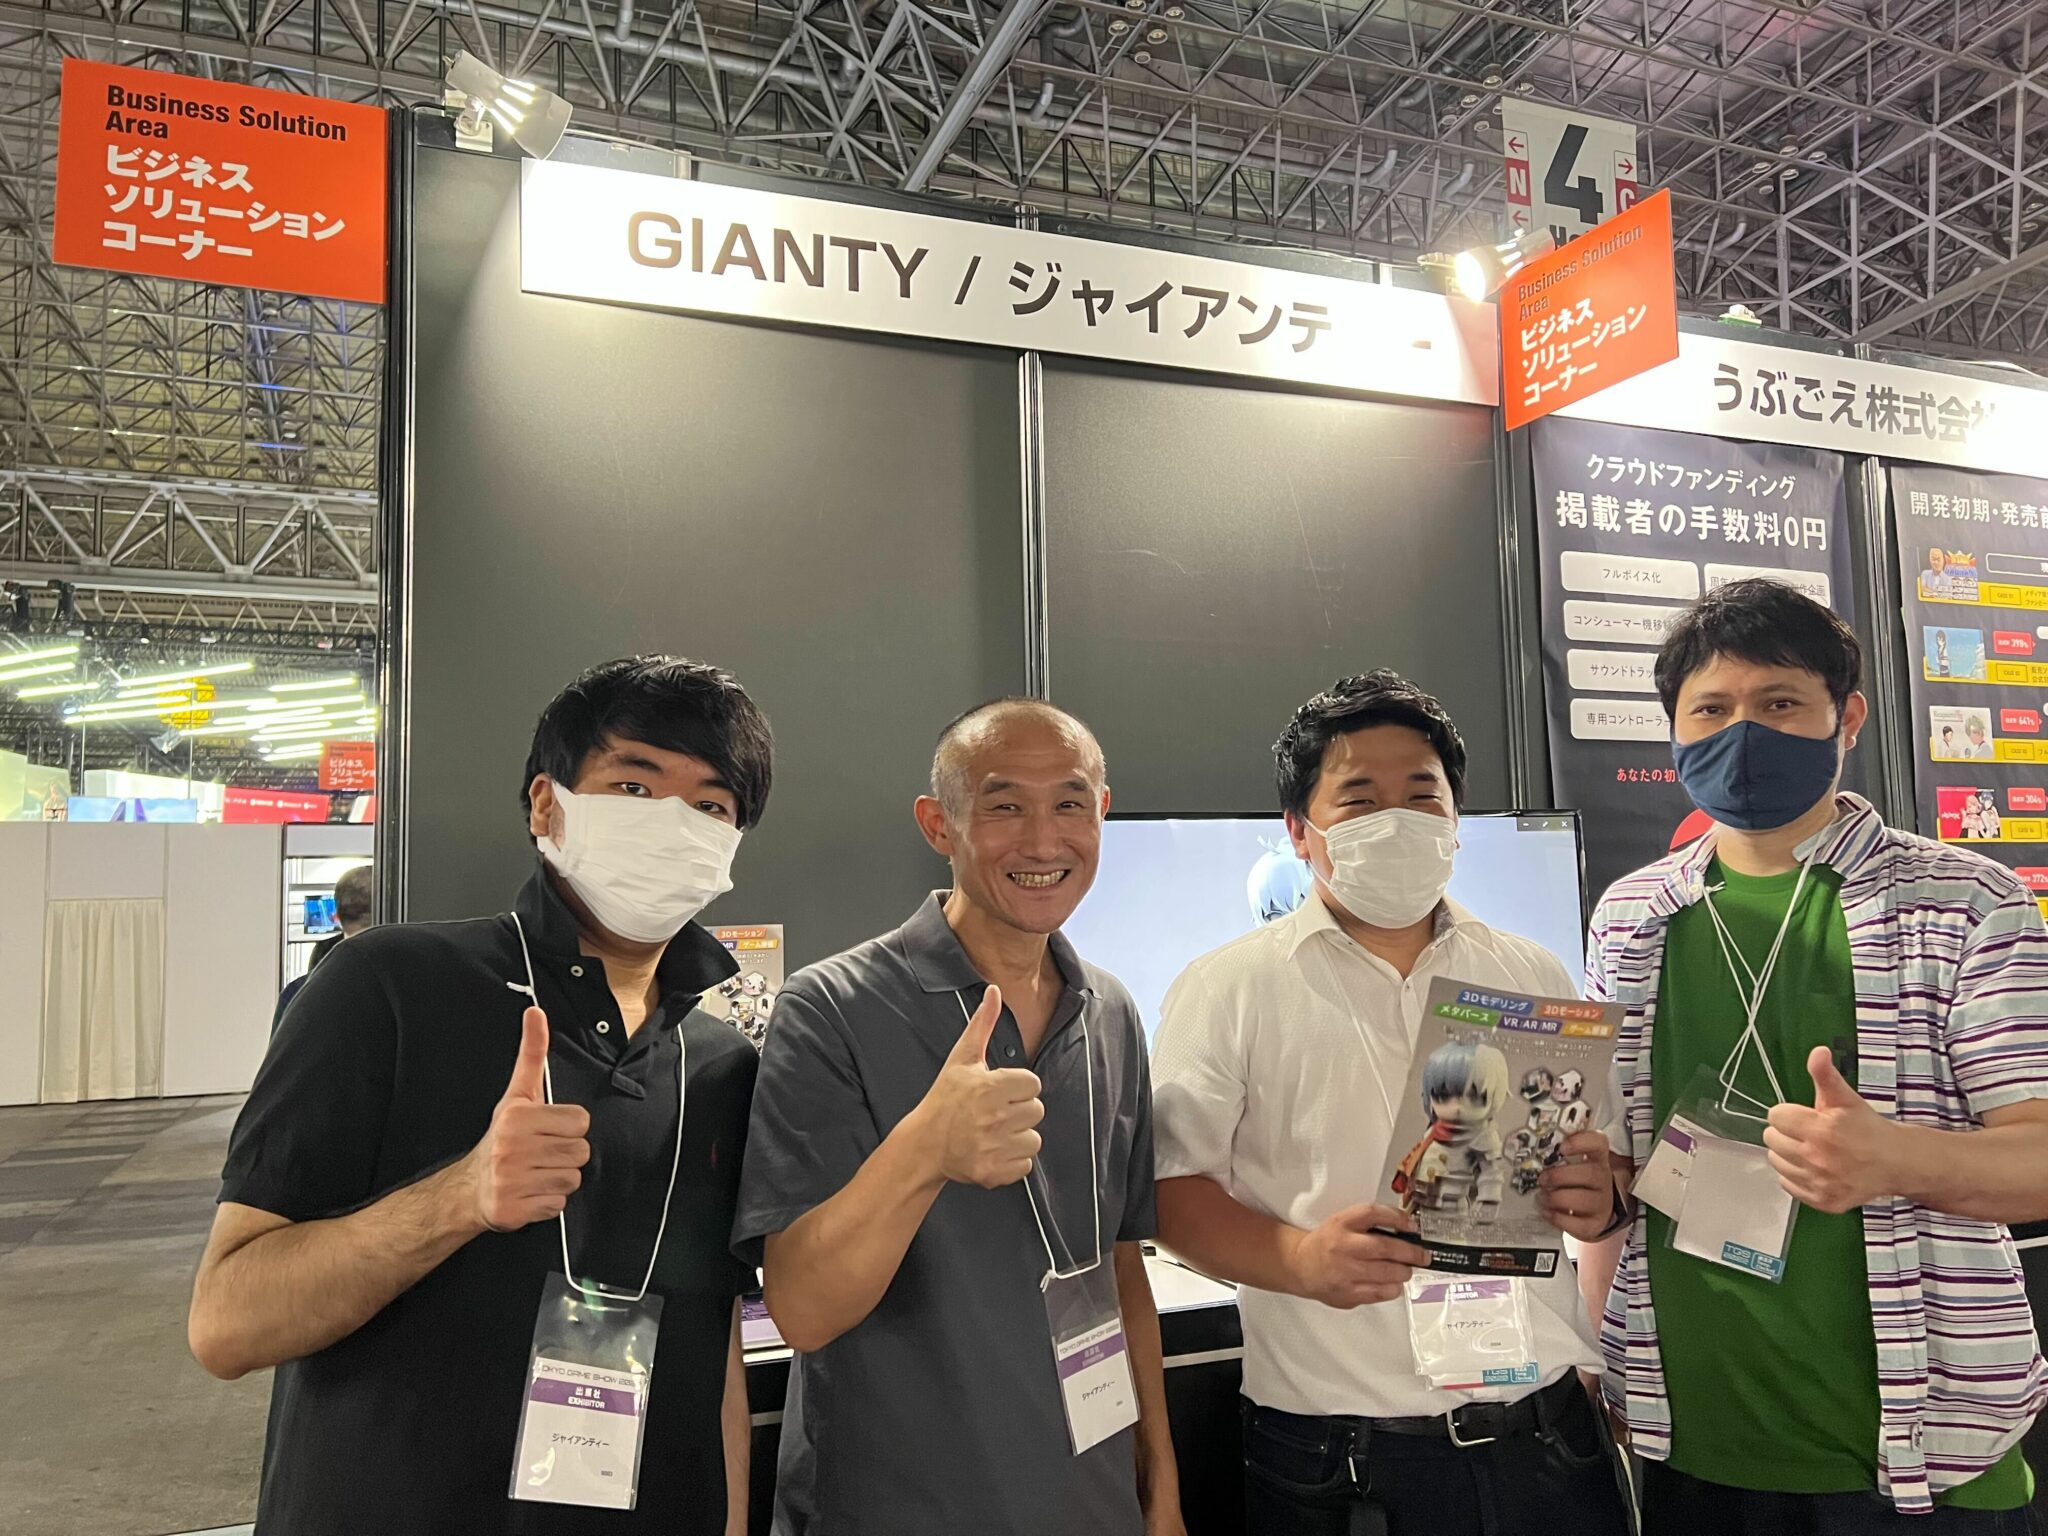 GIANTY at Business Solution Area - Where developers meet and collaborate